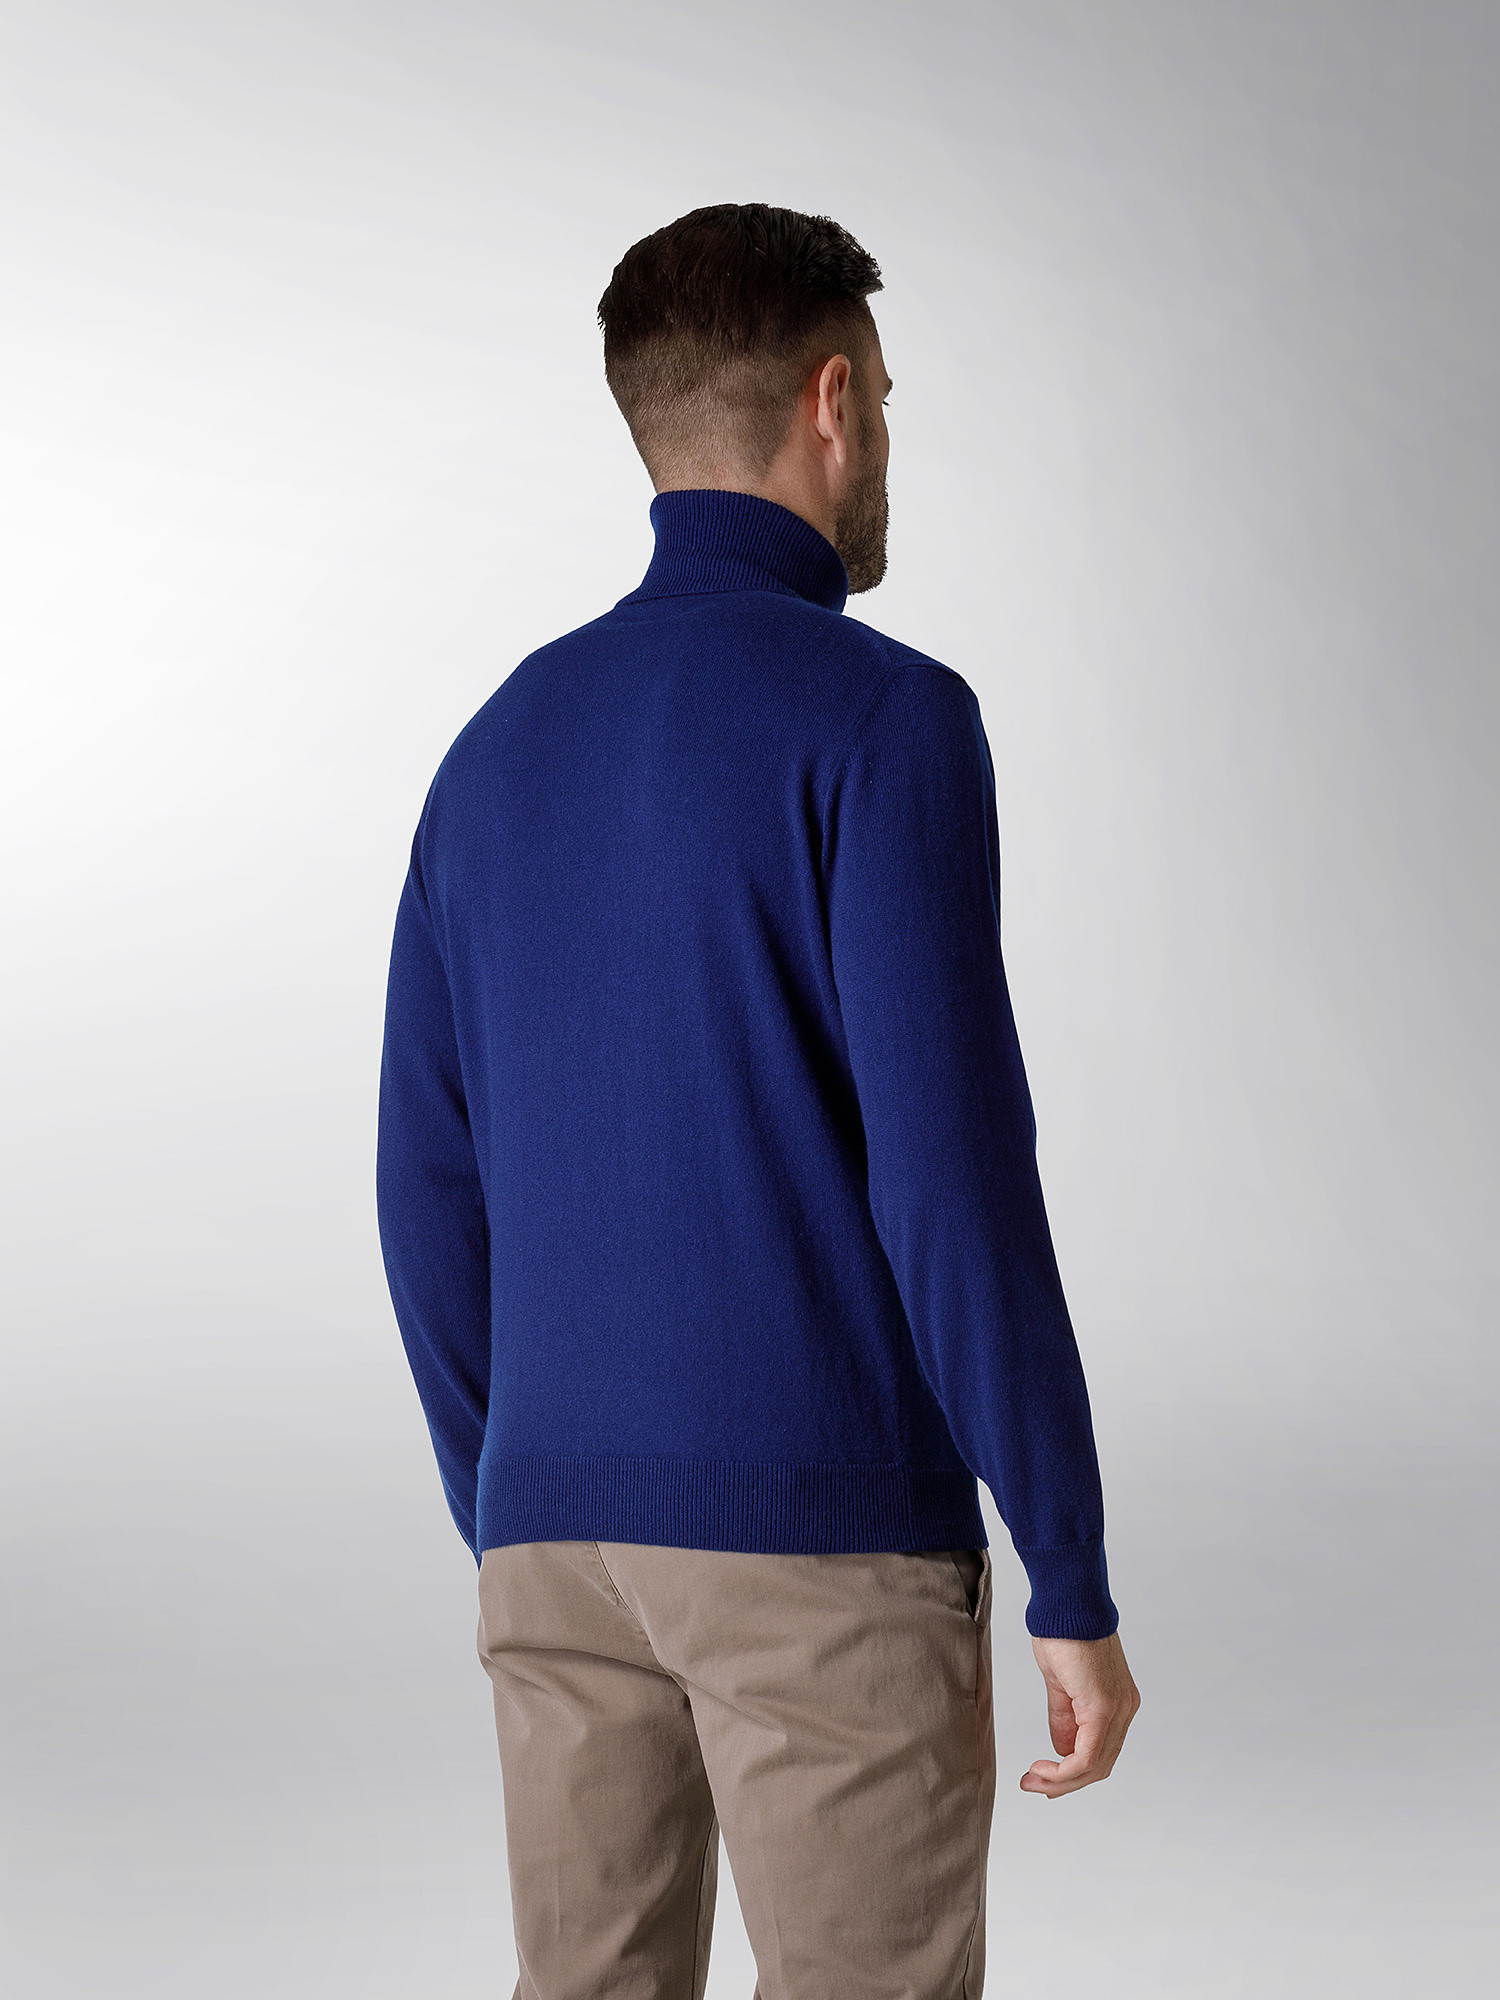 Coin Cashmere - Dolcevita in puro cashmere premium, Blu royal, large image number 2